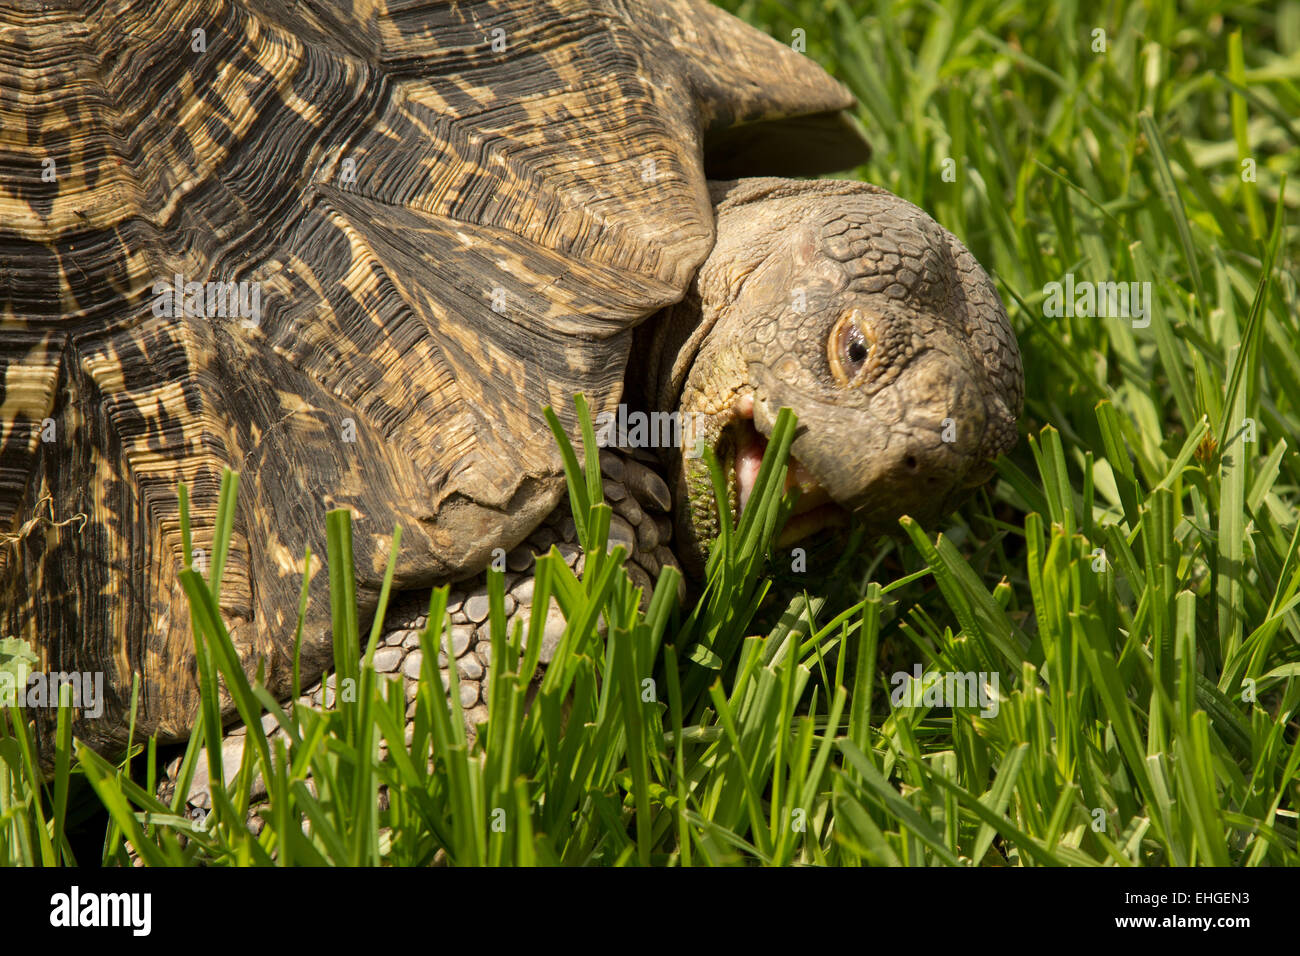 A turtle eating grass Stock Photo